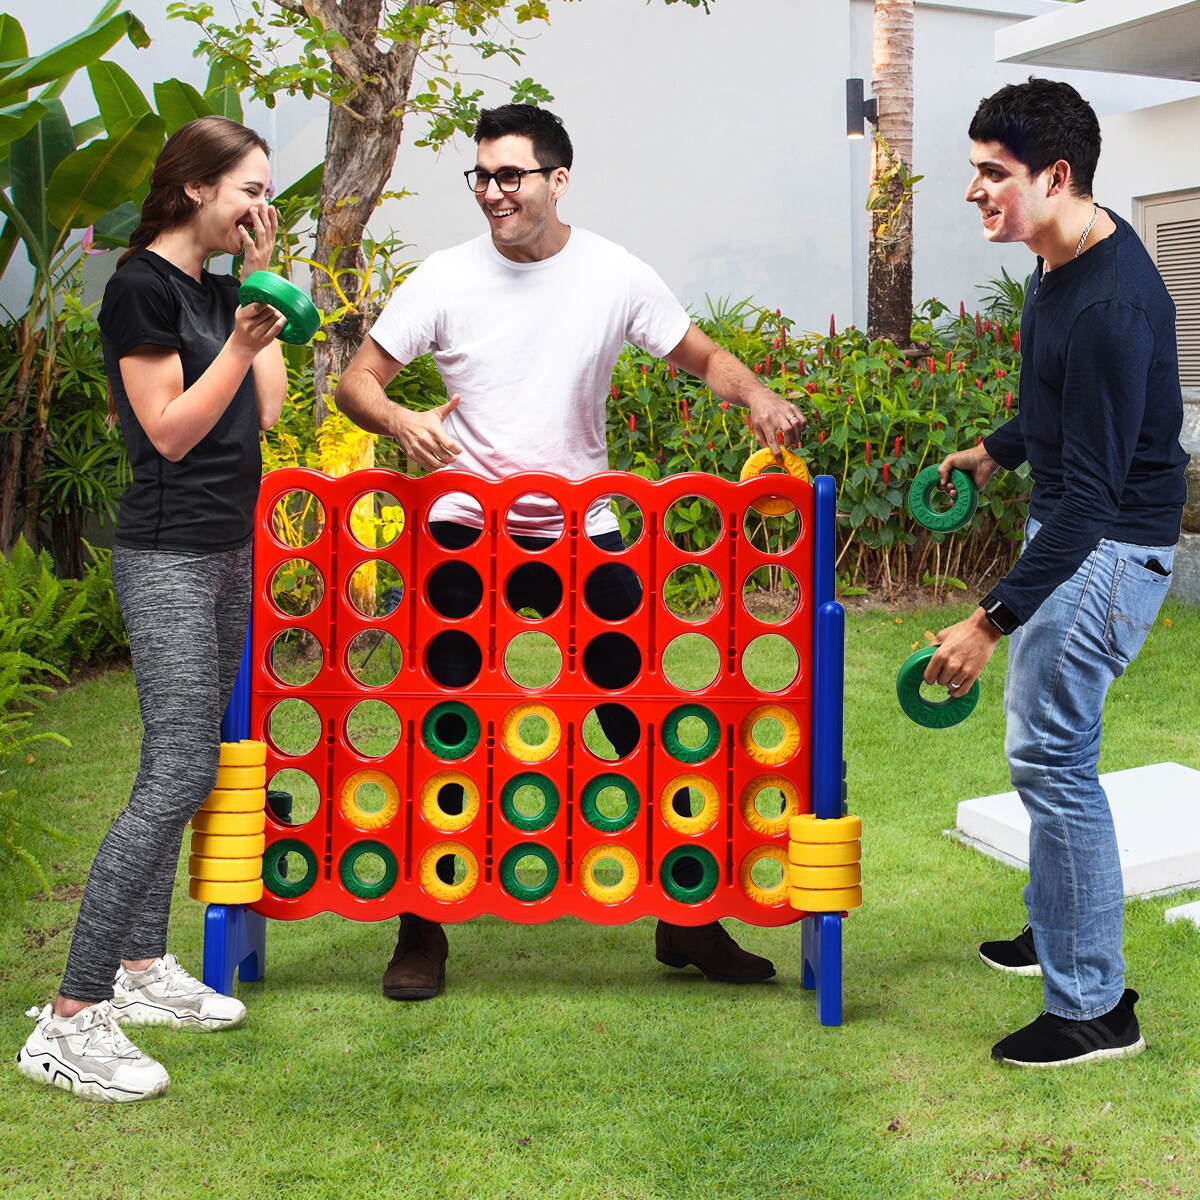 Costway Jumbo 4-to-Score 4 in A Row Giant Game Set Kids Adults Family Fun